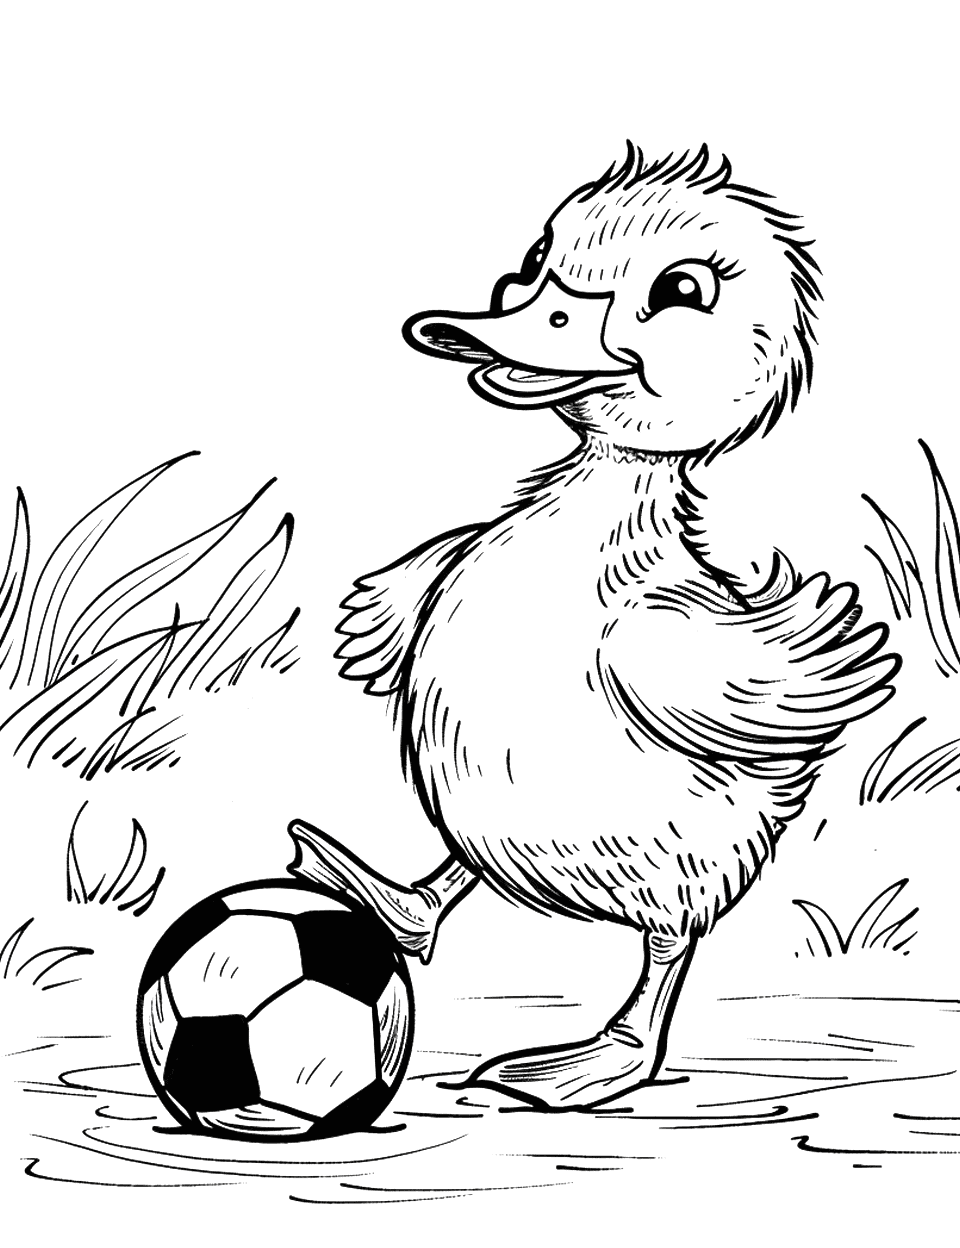 Duck Playing Soccer Coloring Page - A duck with a soccer ball at its feet, ready to kick and score a goal.